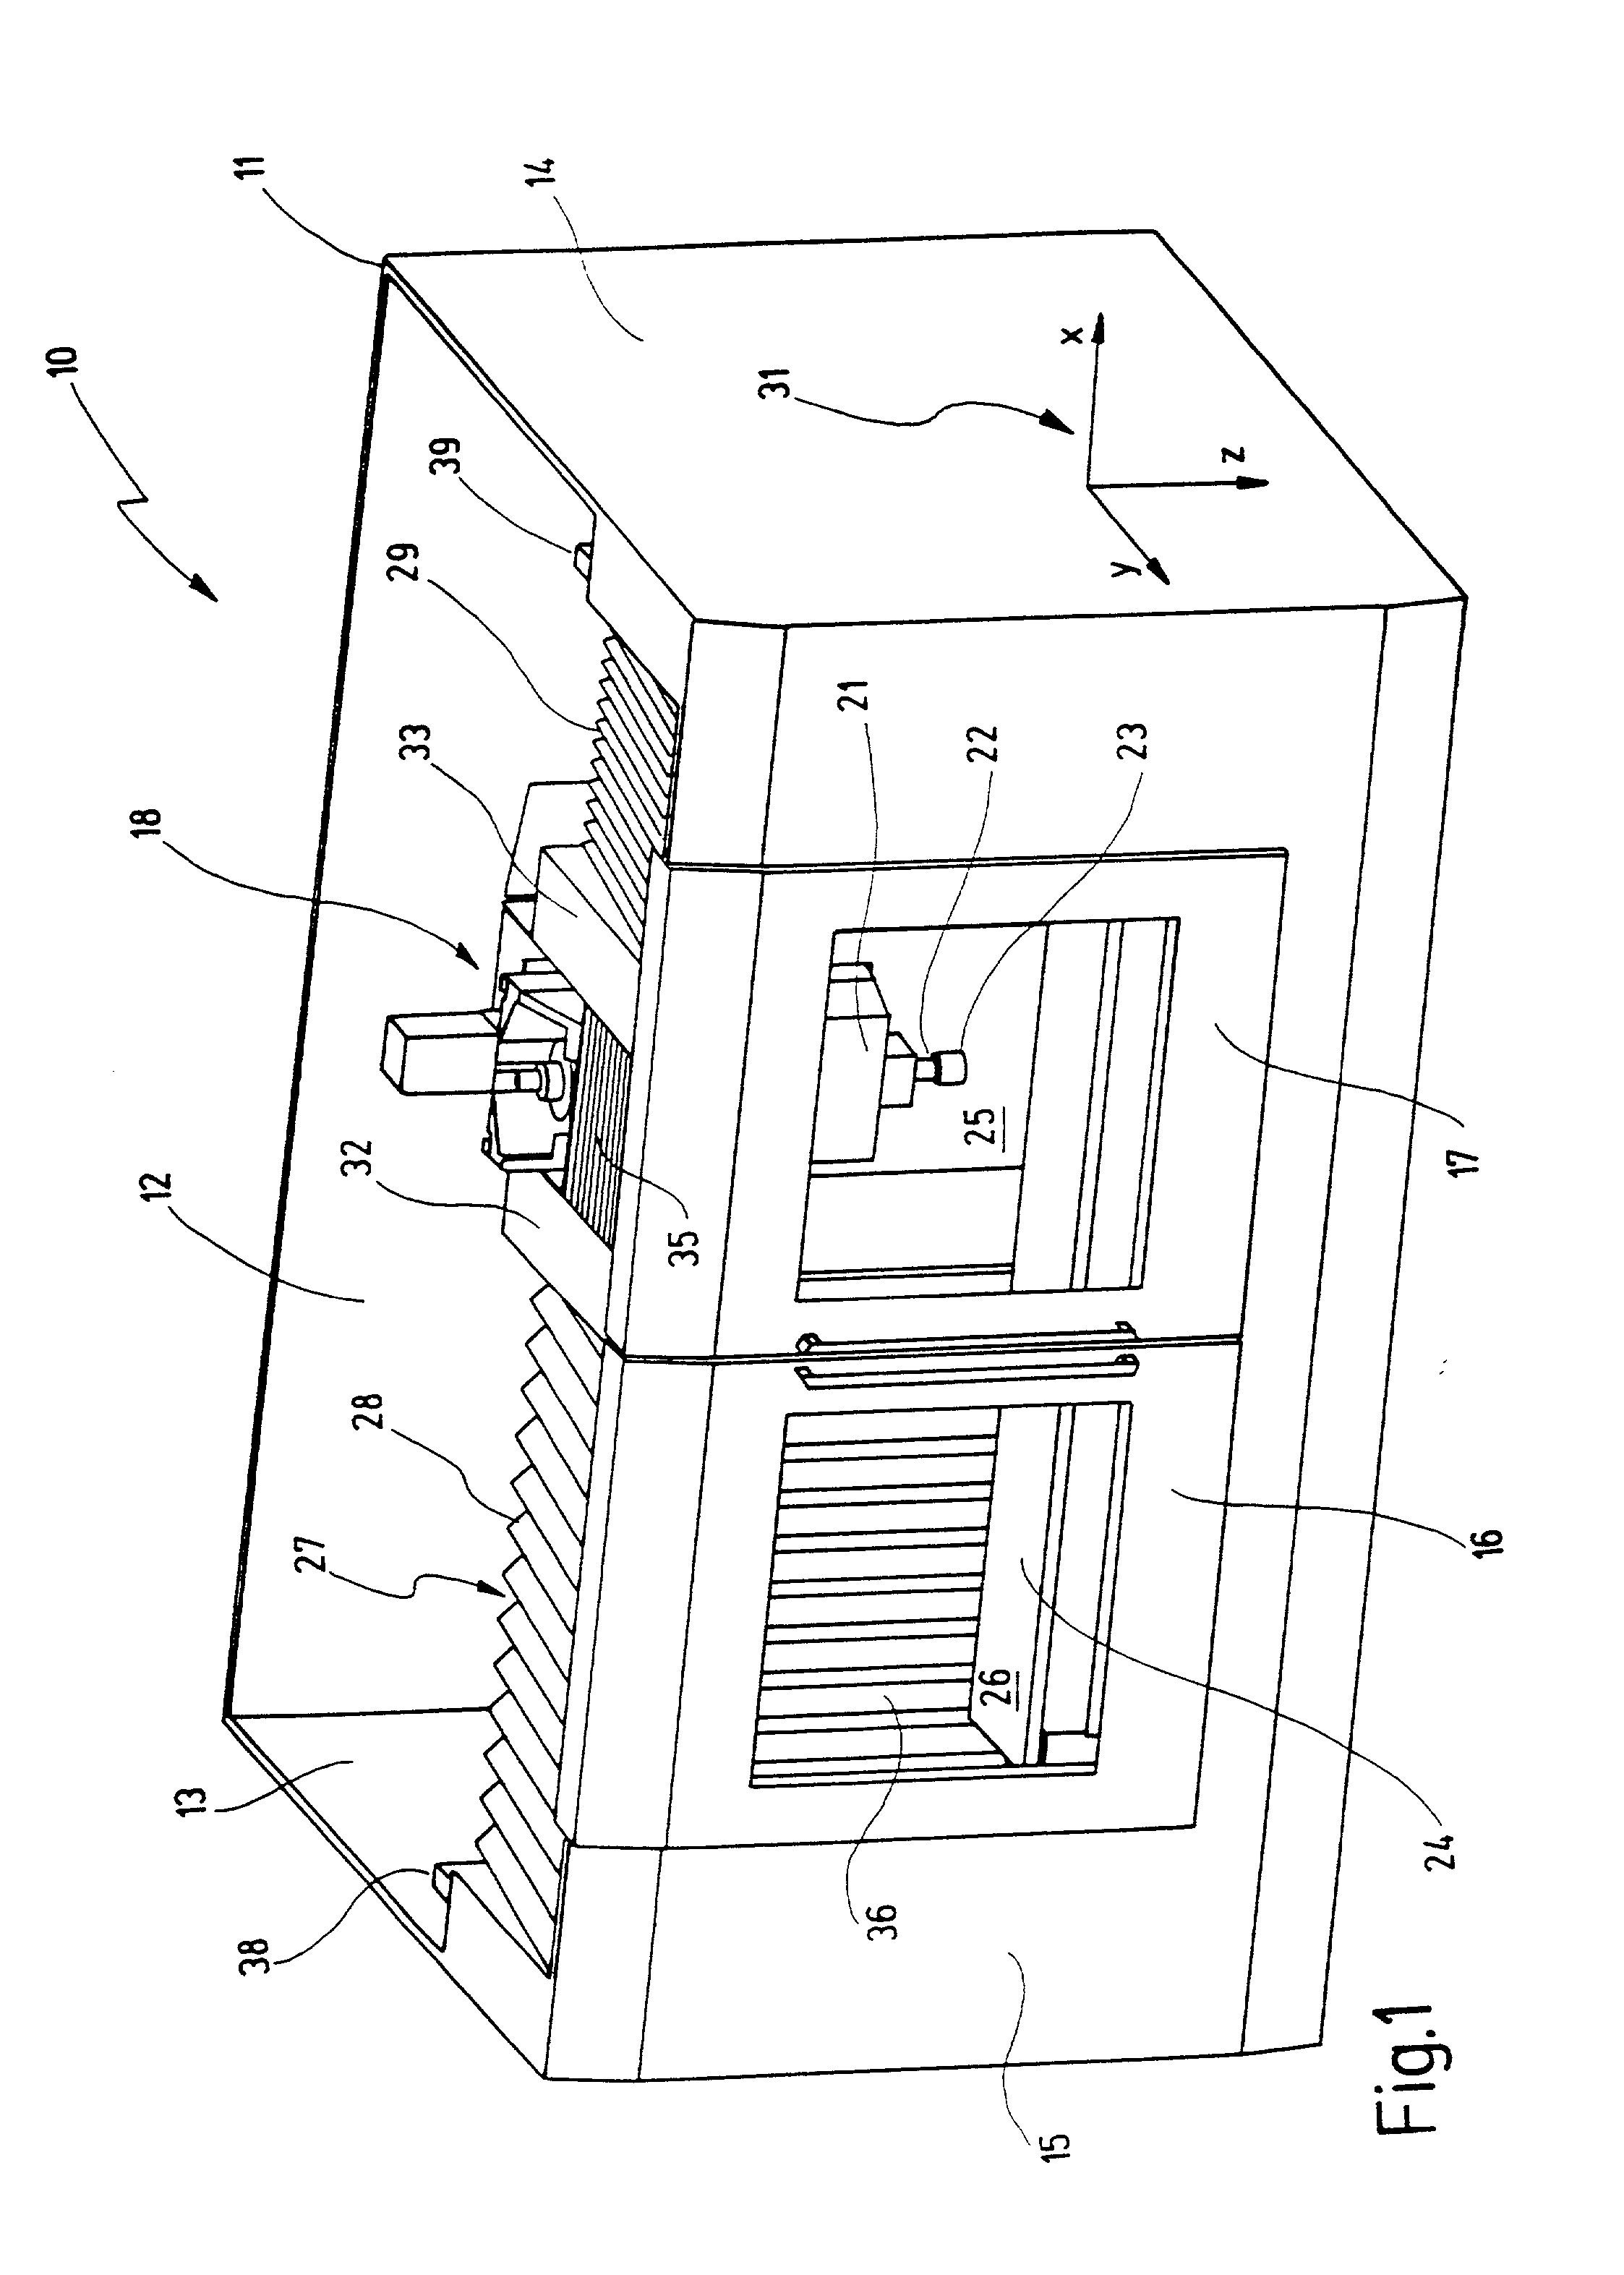 Machine tool with roof covering bellow